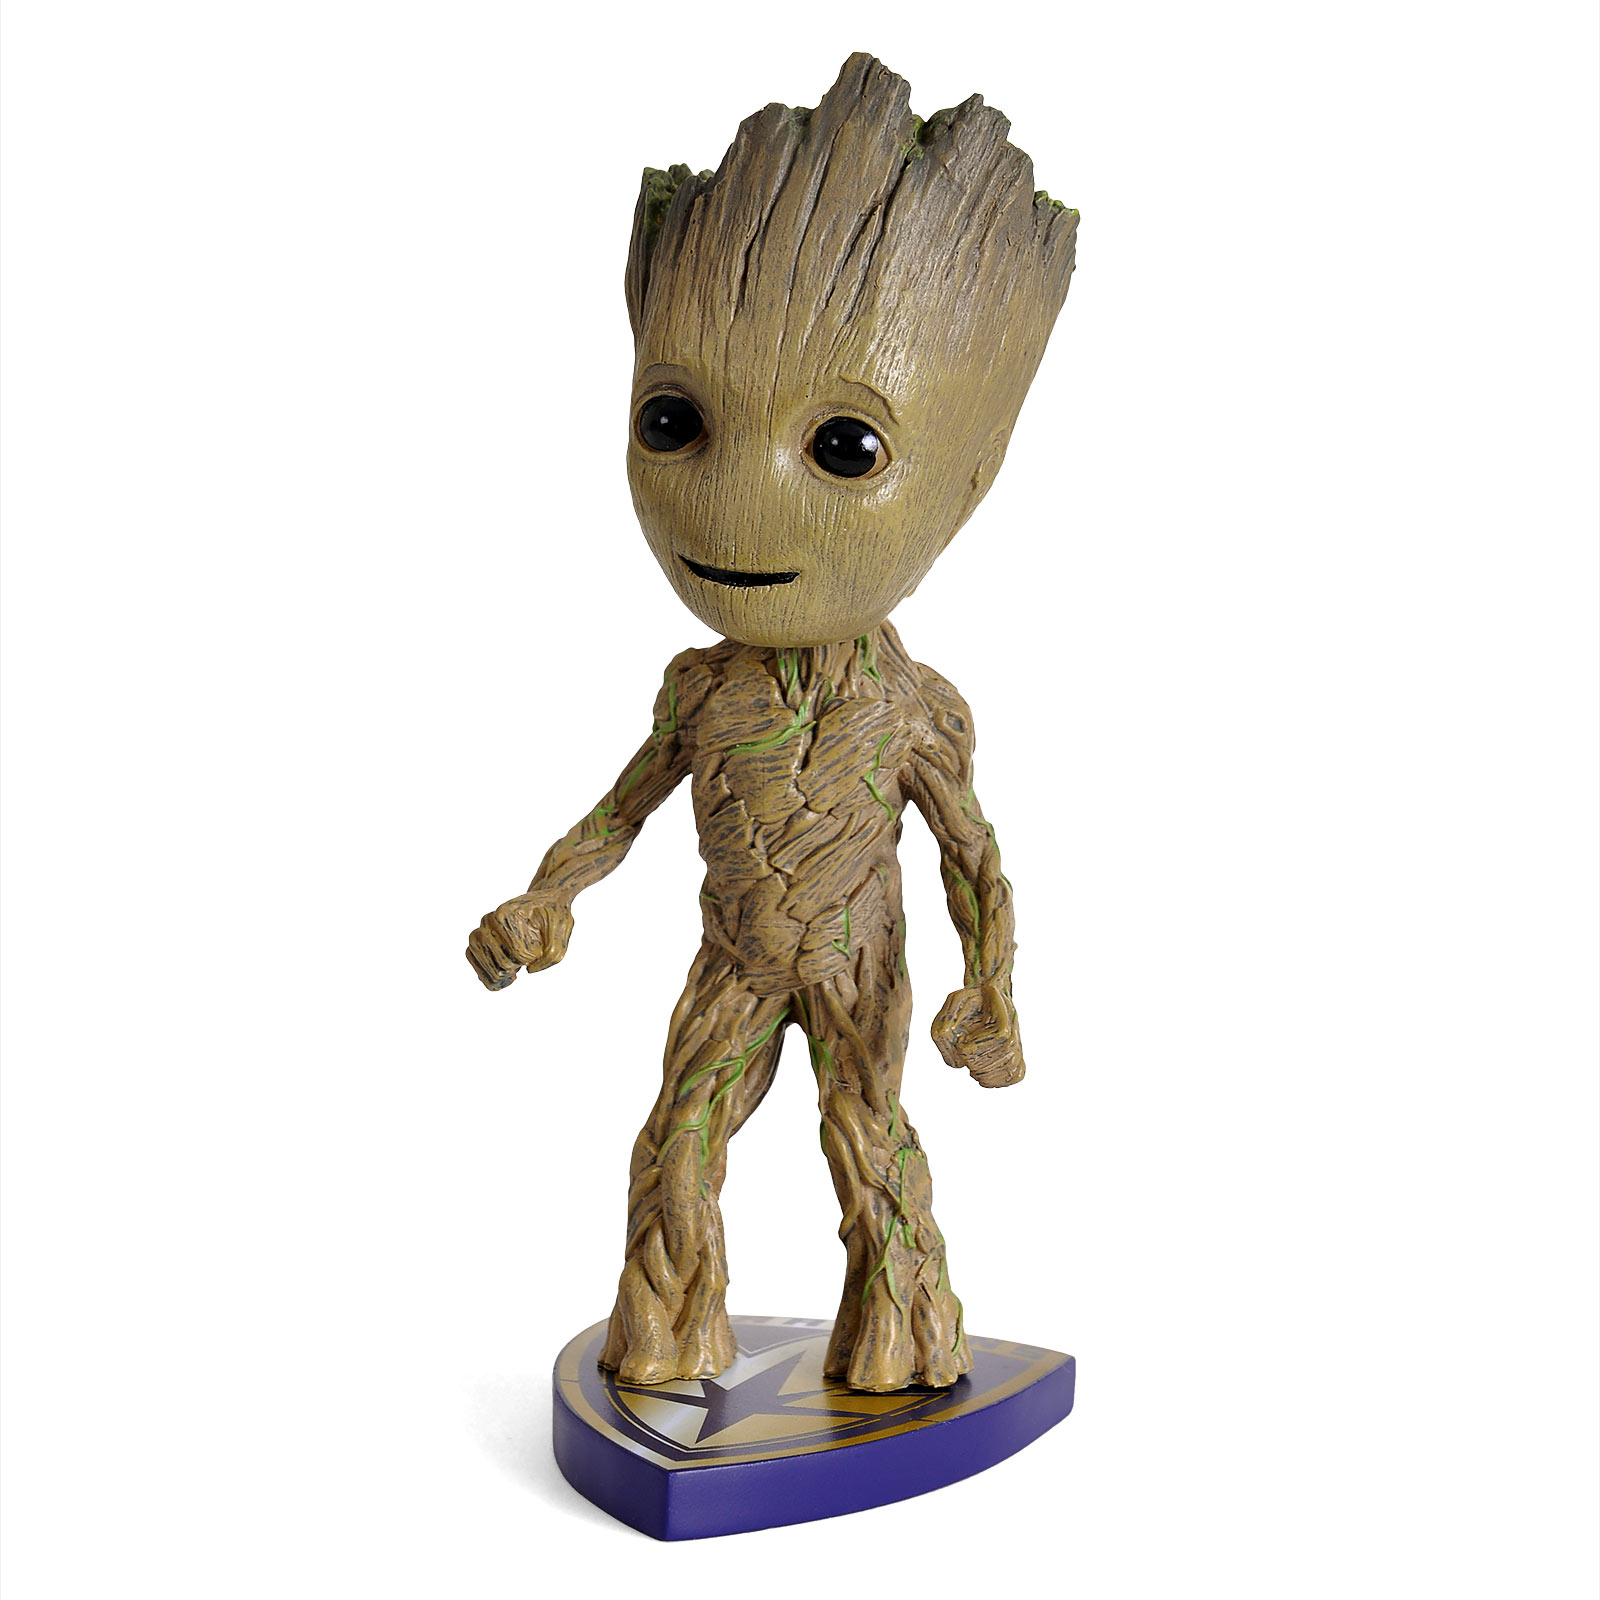 Guardians of the Galaxy - Groot Bobblehead Figure Deluxe